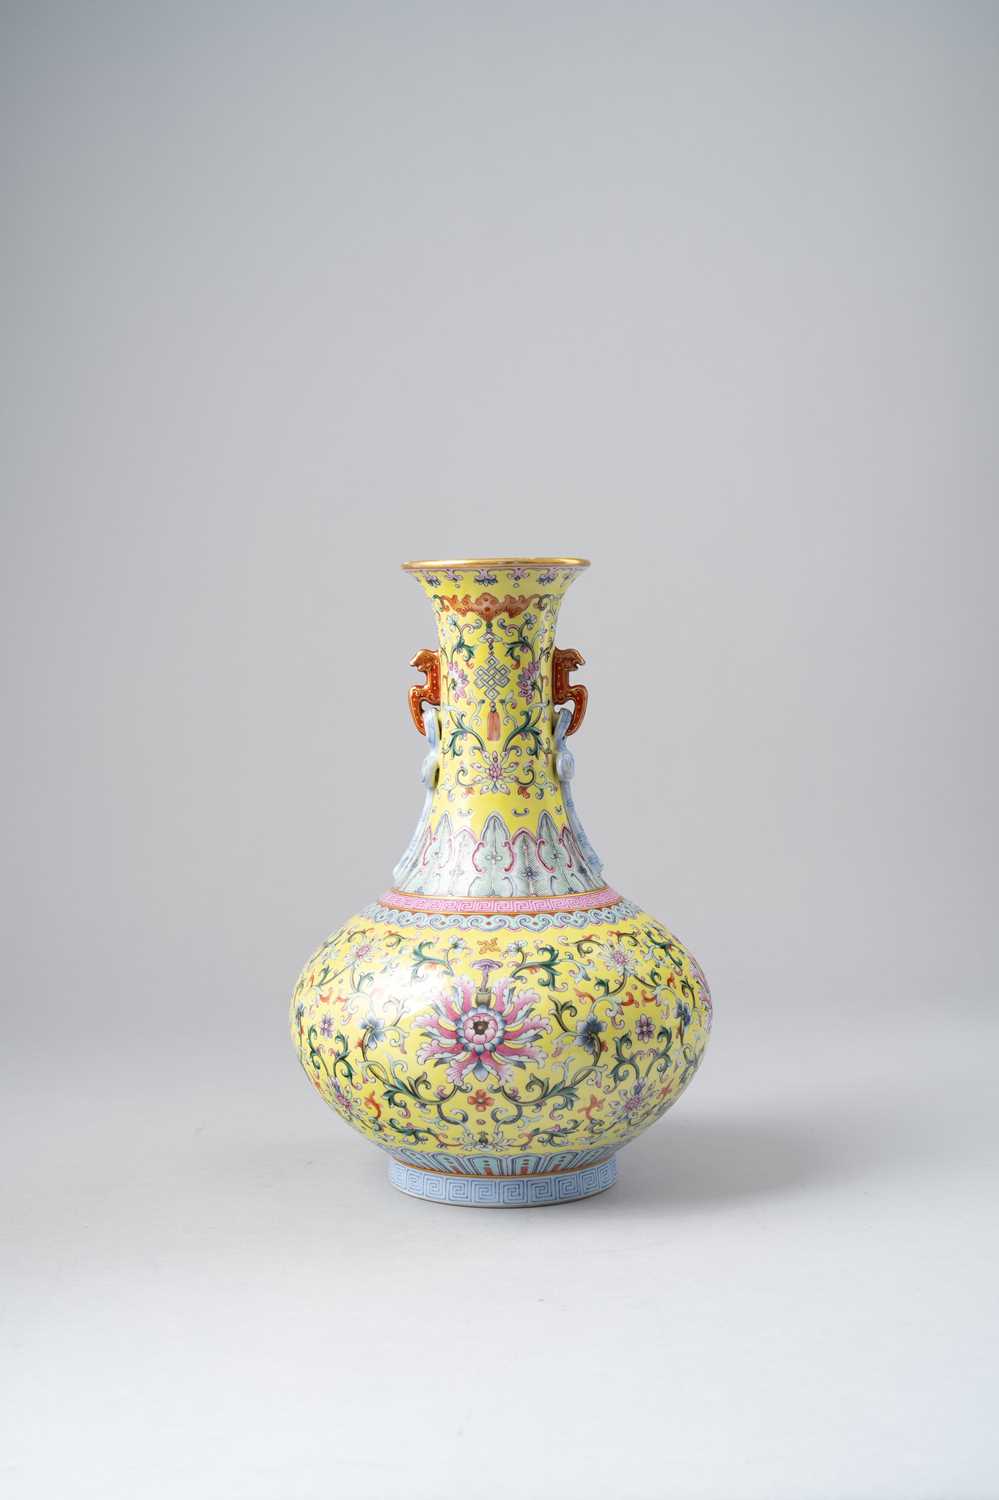 NO RESERVE A CHINESE FAMILLE ROSE YELLOW-GROUND 'LOTUS' VASE MODERN Finely painted with formal